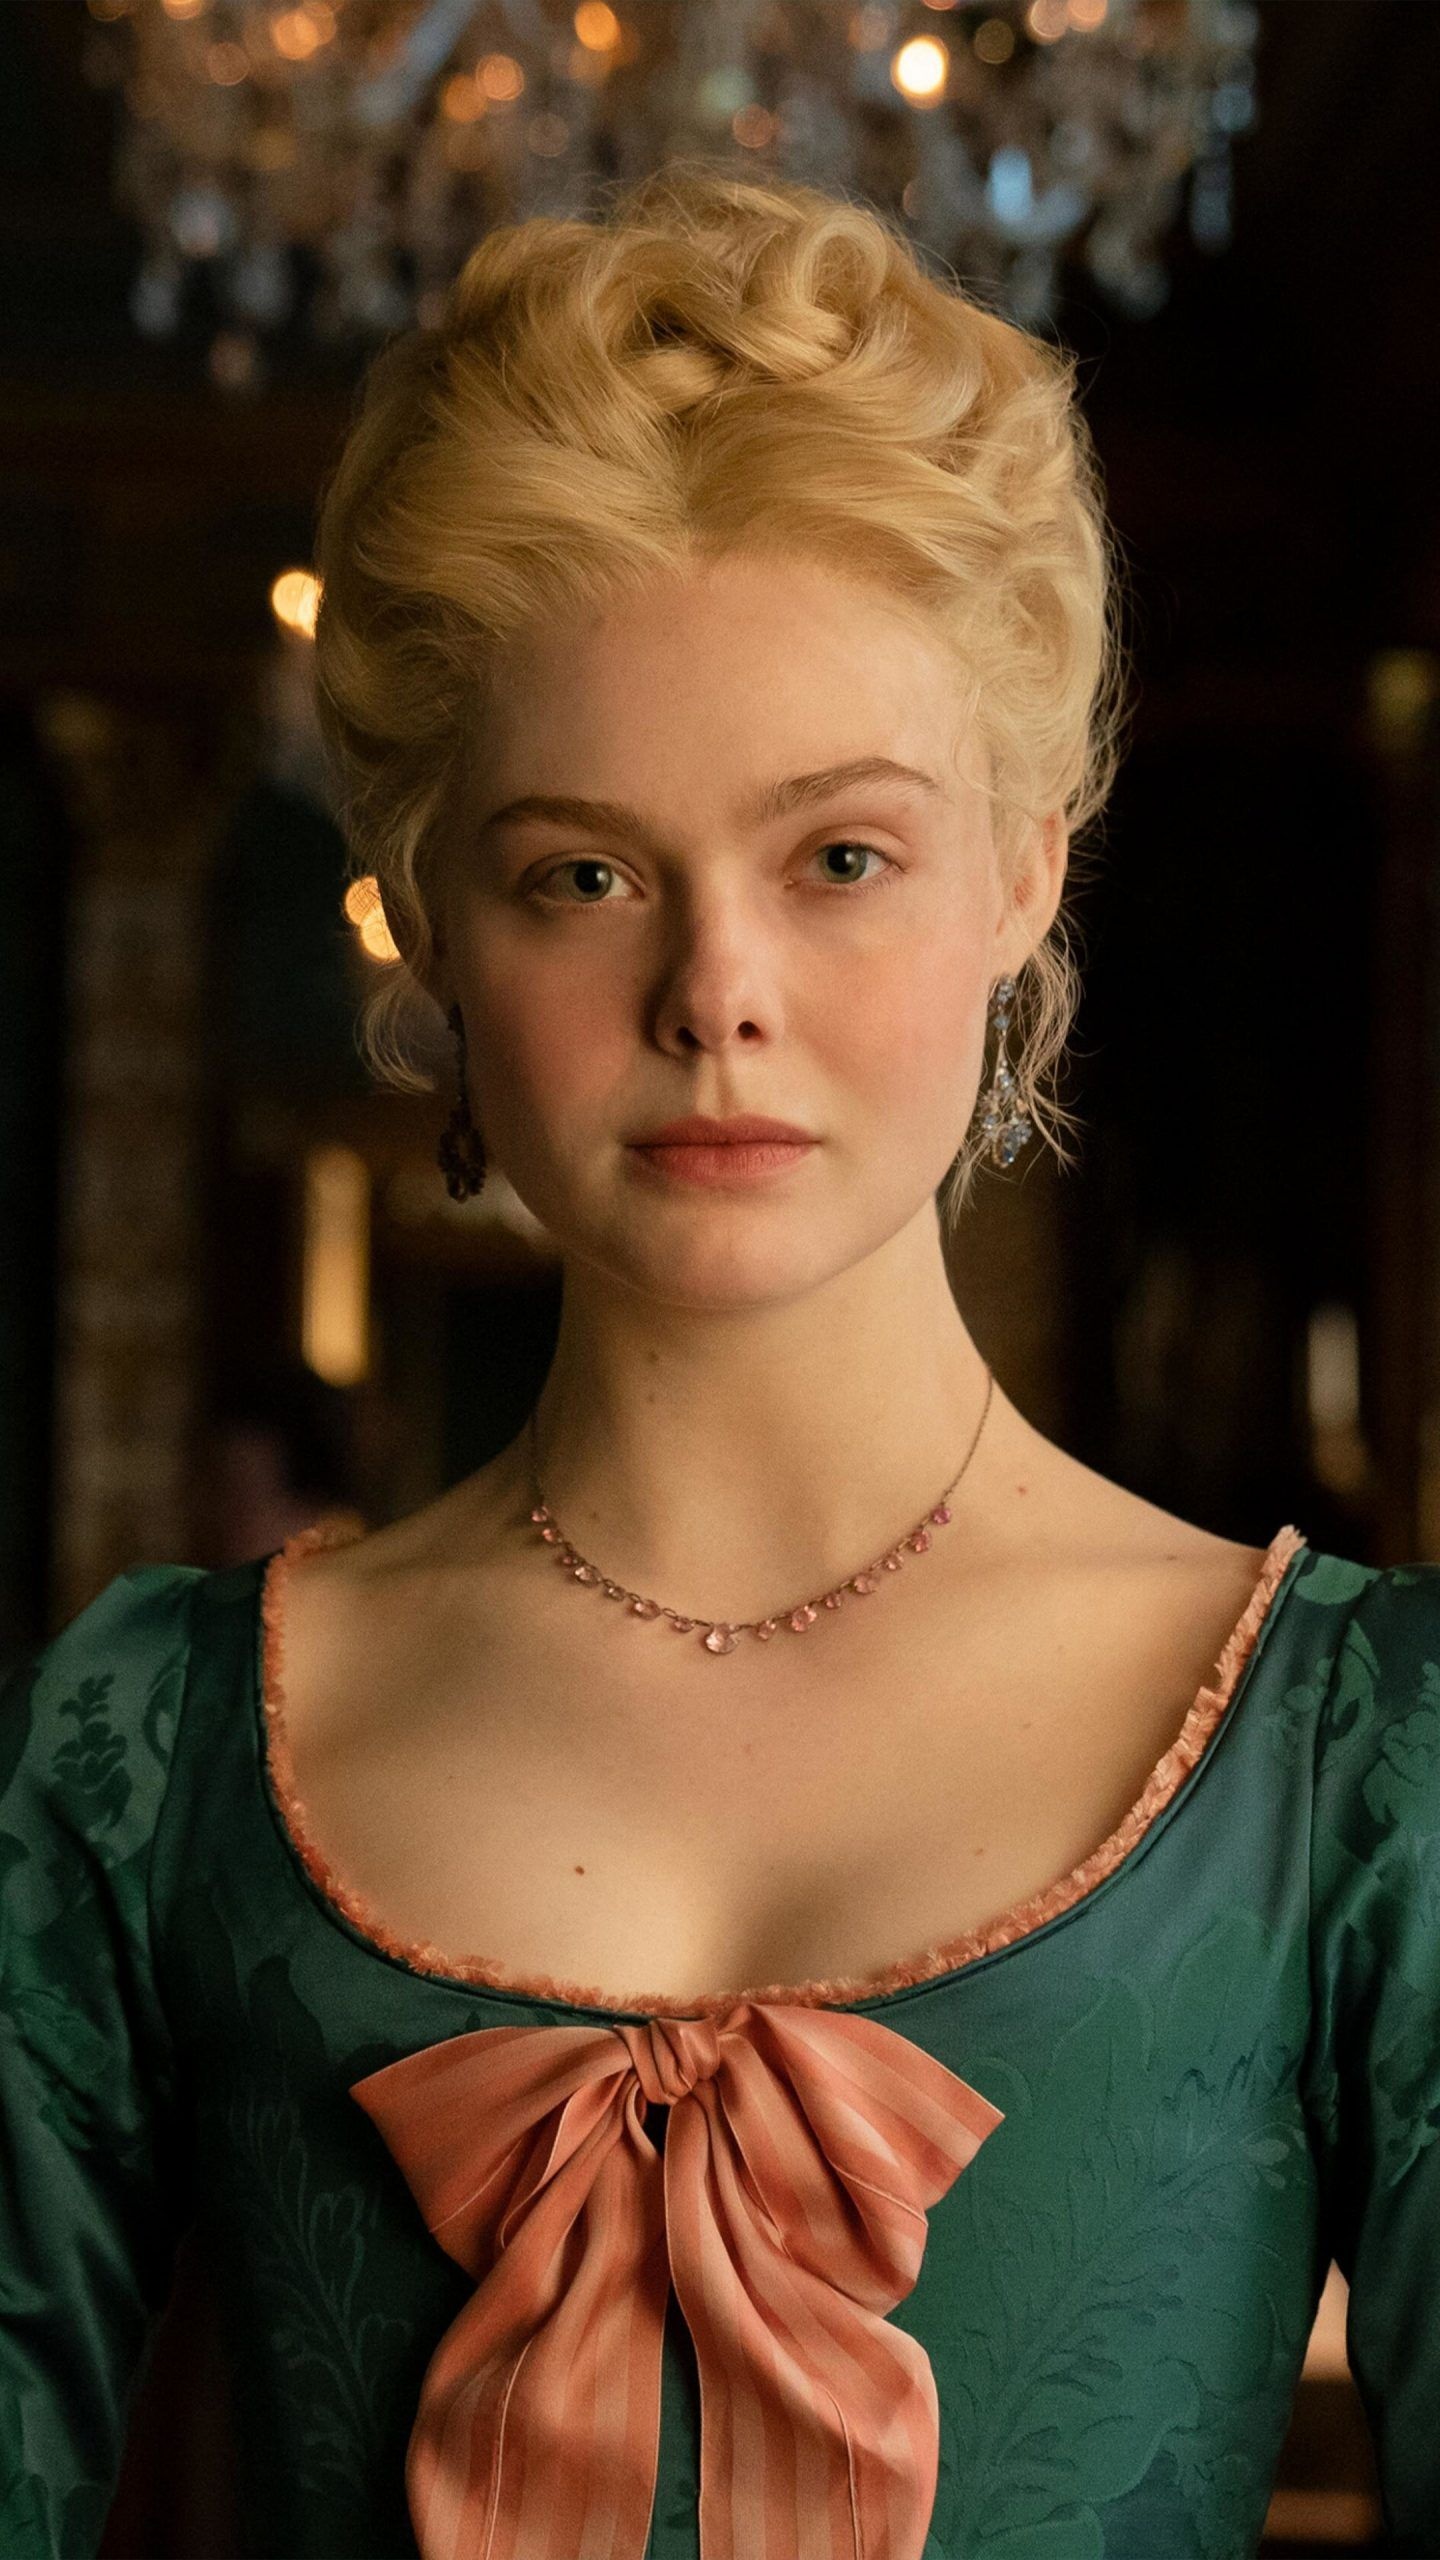 Elle Fanning: Starred as Catherine the Great in a black comedy-drama television series, The Great. 1440x2560 HD Wallpaper.